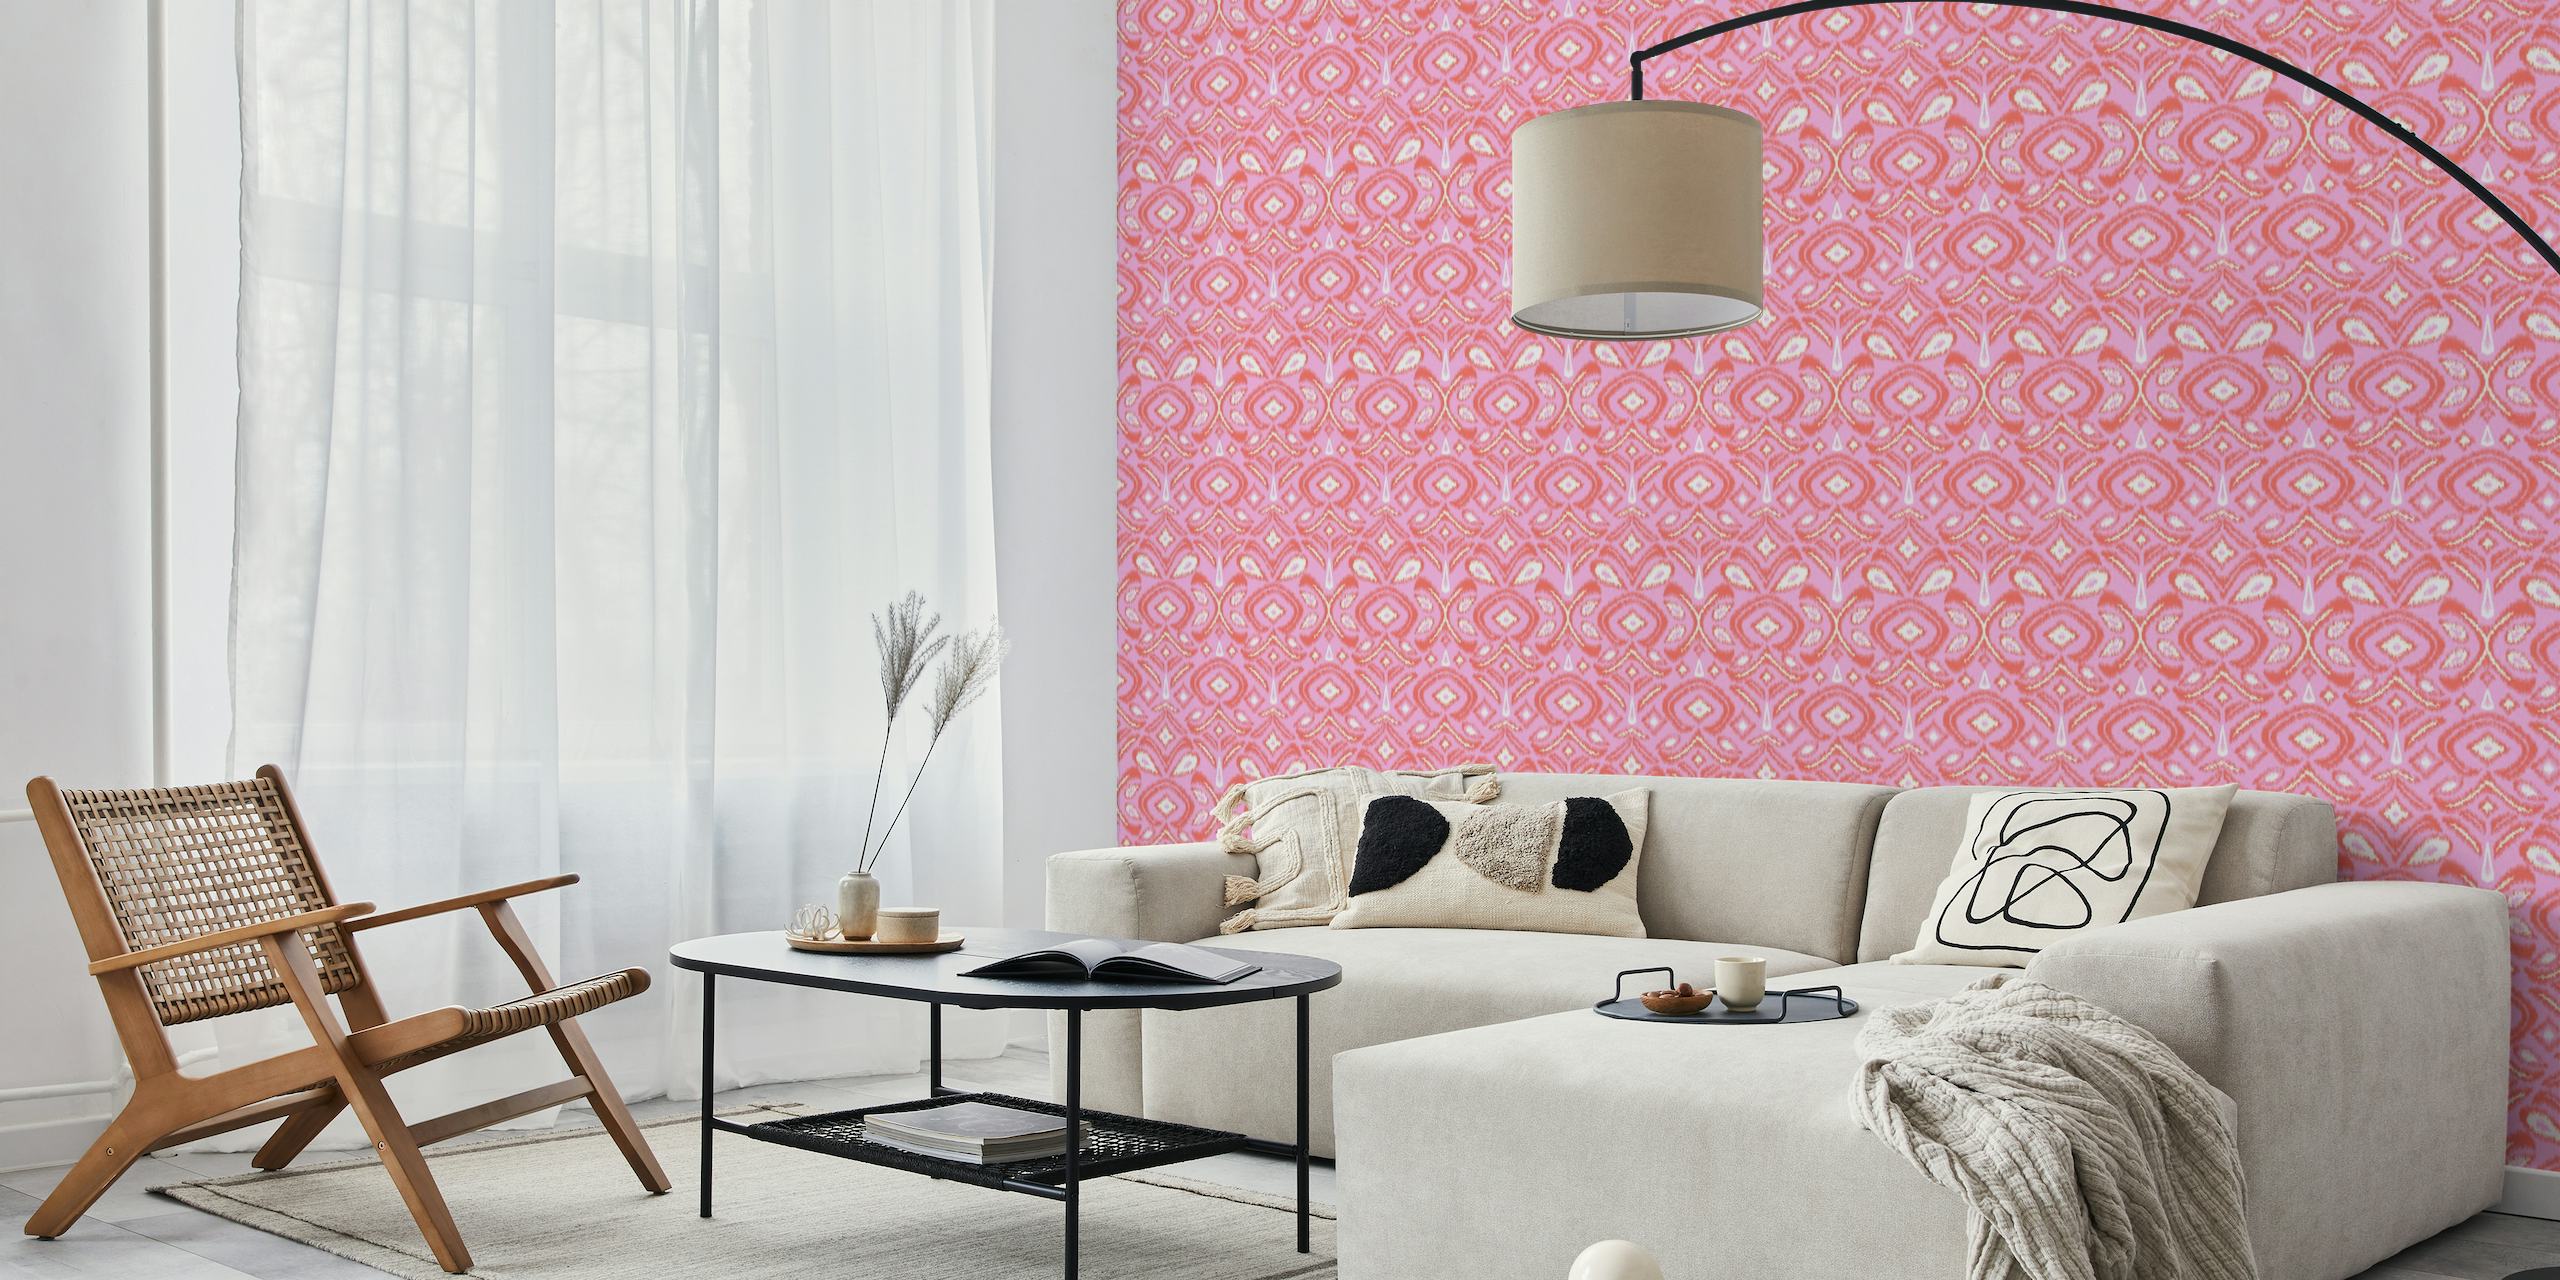 Ikat flower - vibrant pink and coral behang